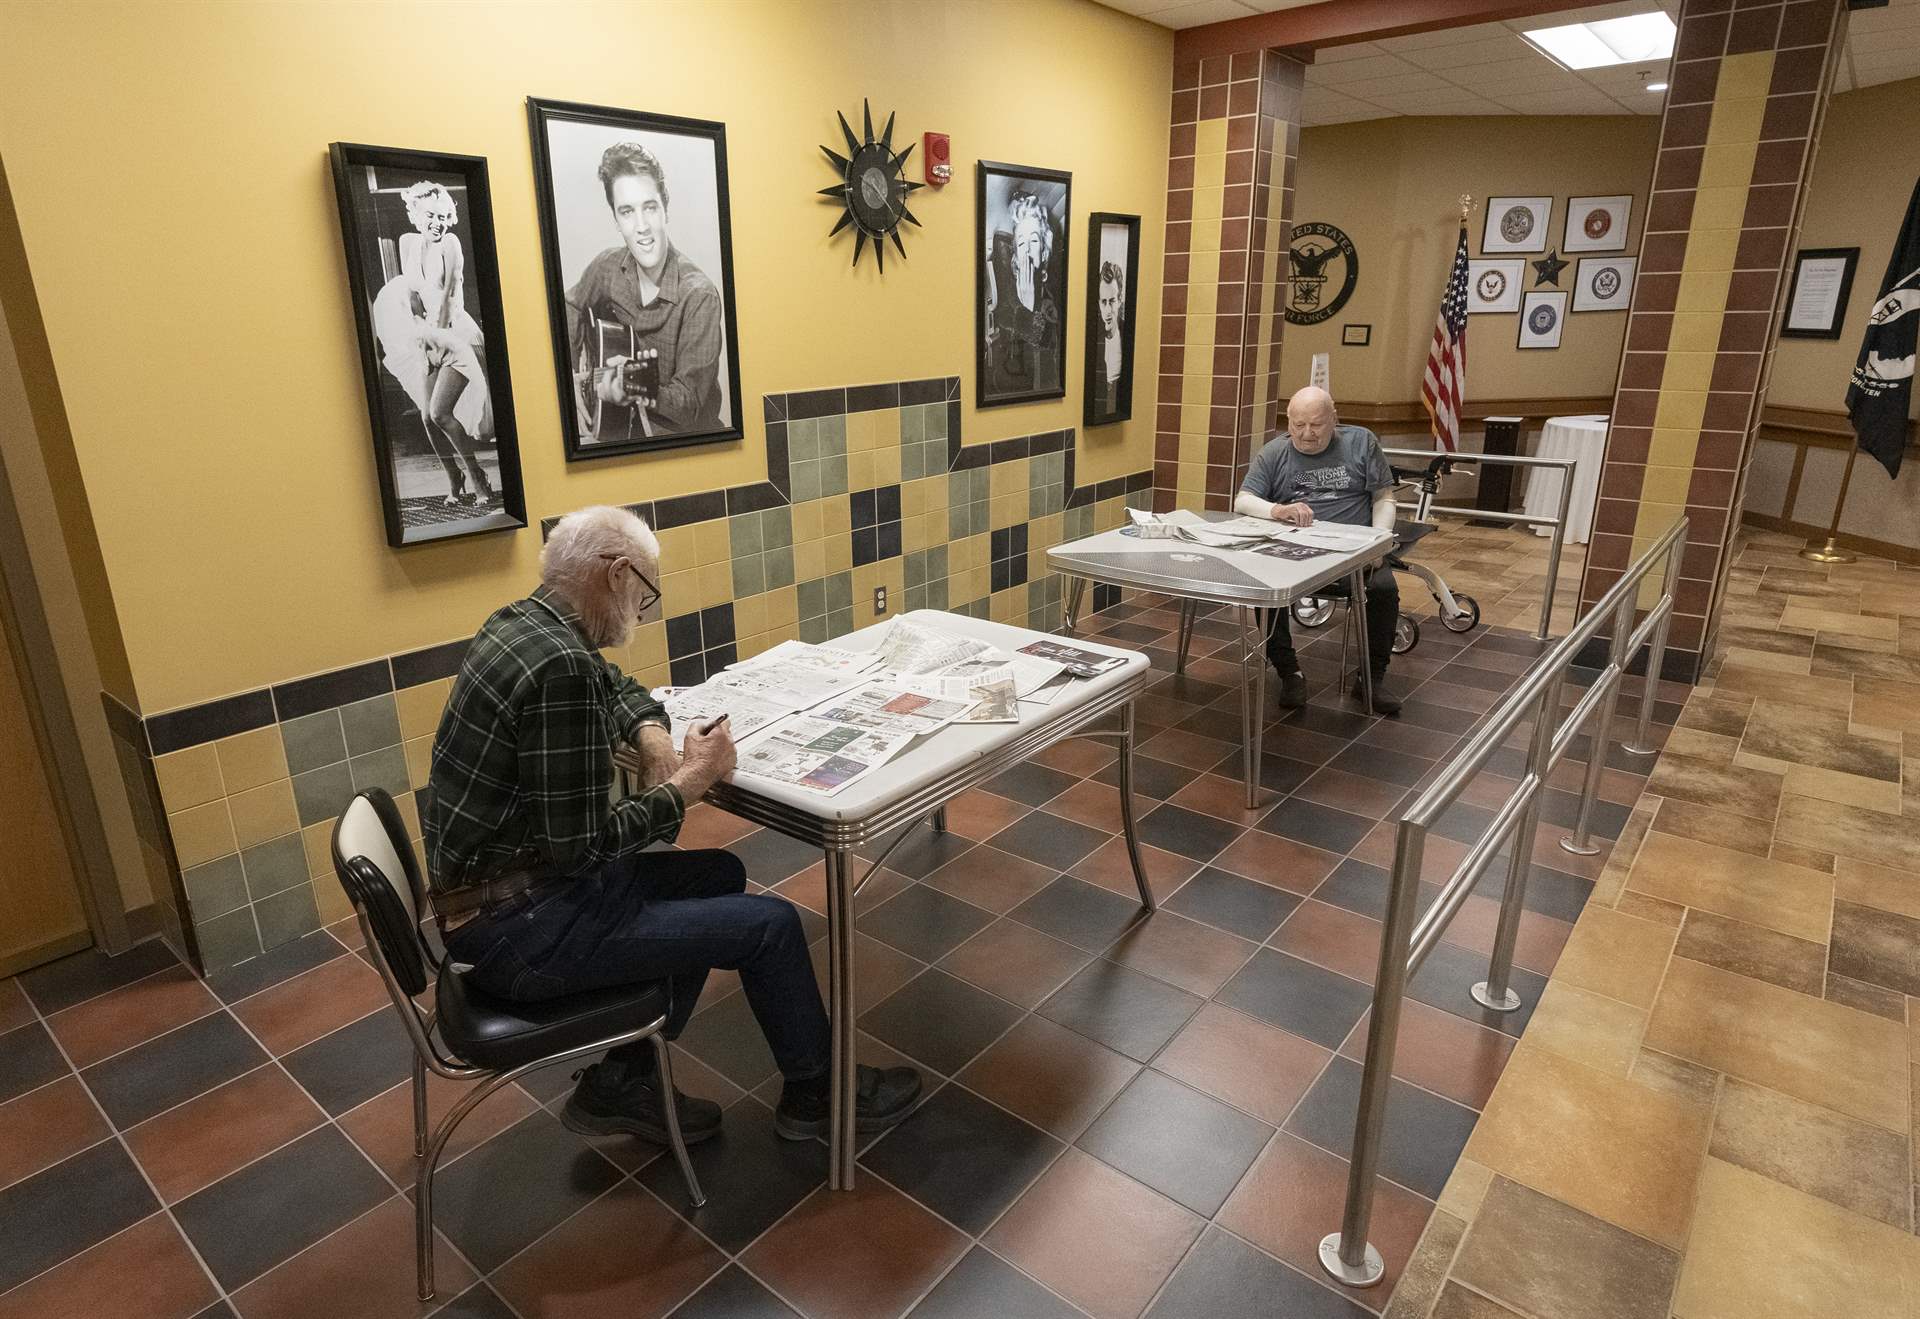 North Dakota Veterans Home residents reading newspapers in the reading area.